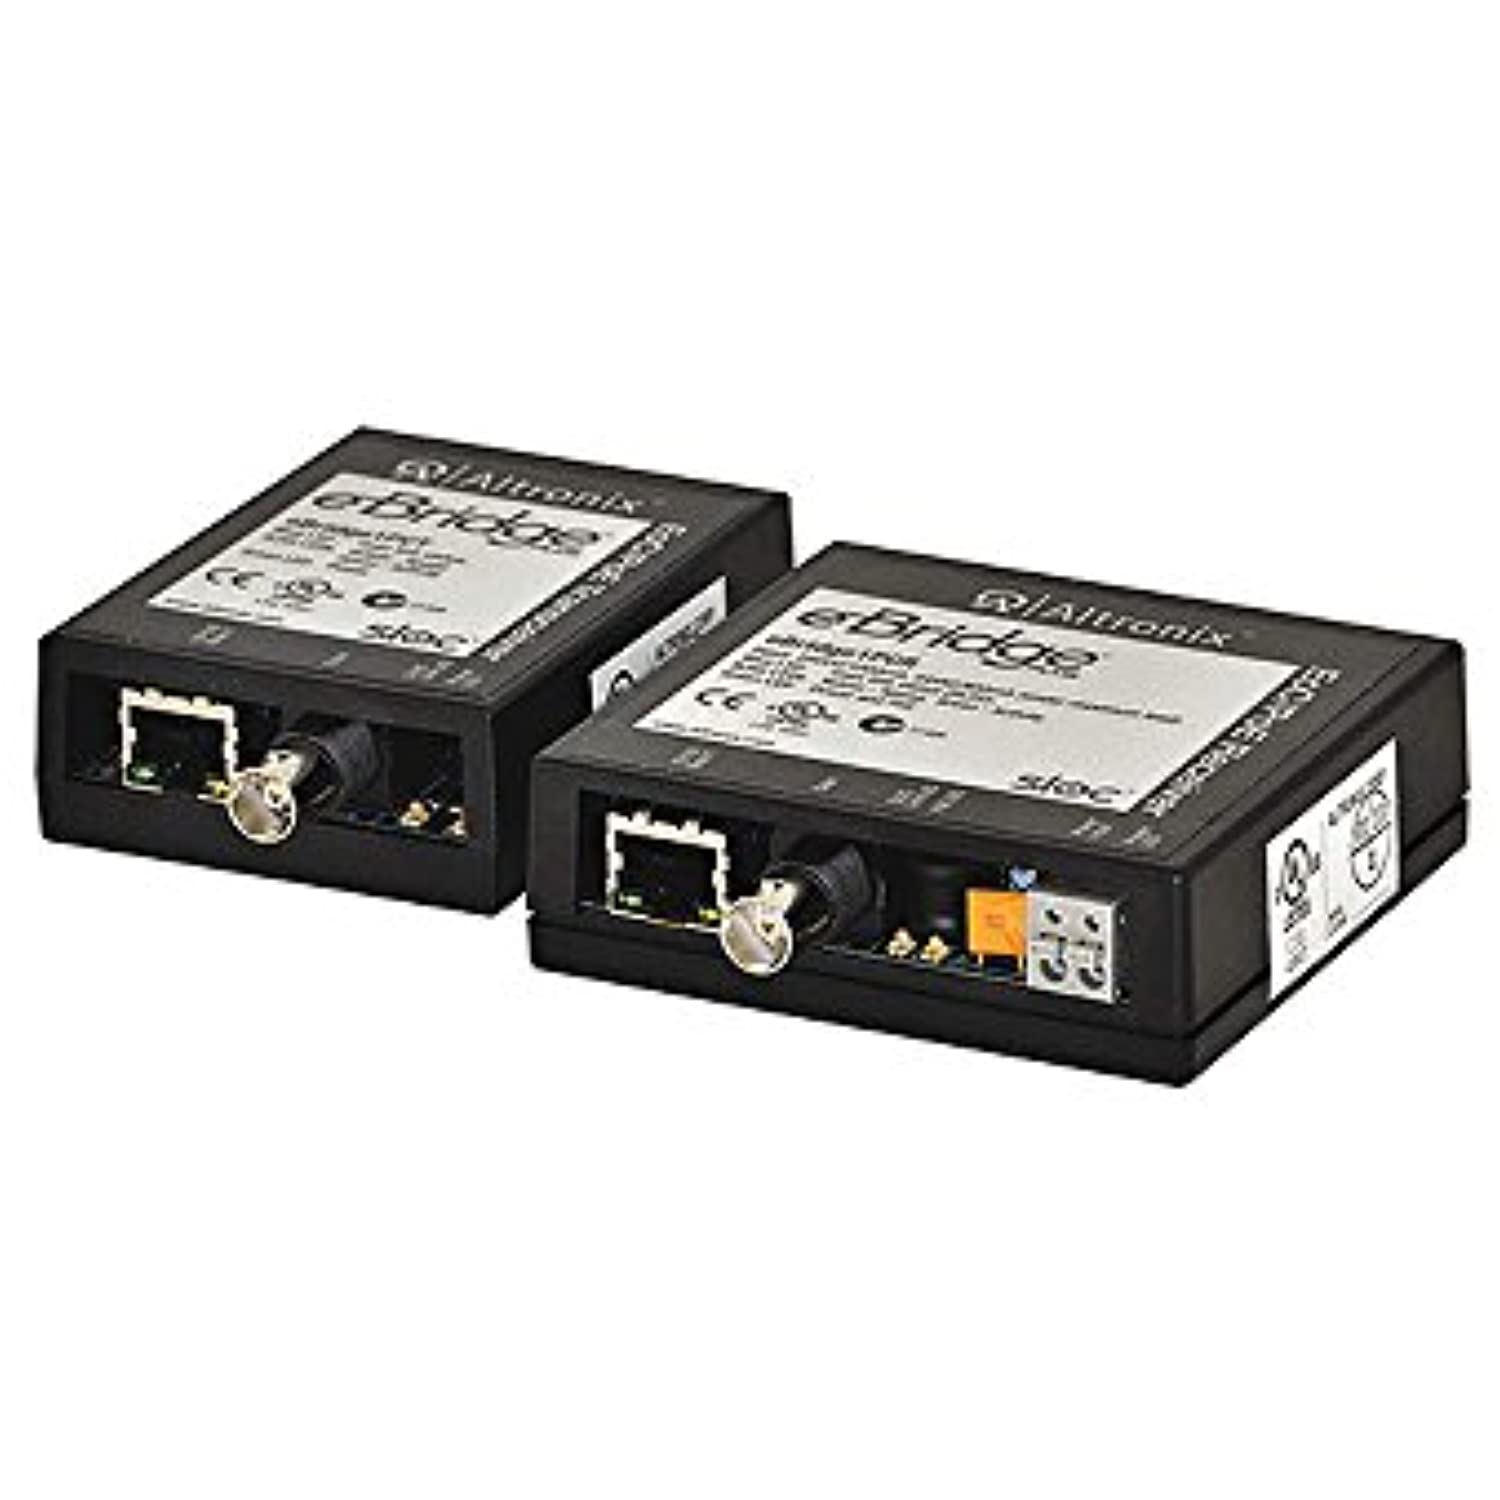 EOC-POE-KIT POE Power and Ethernet Over Coax IP POE Over Coax